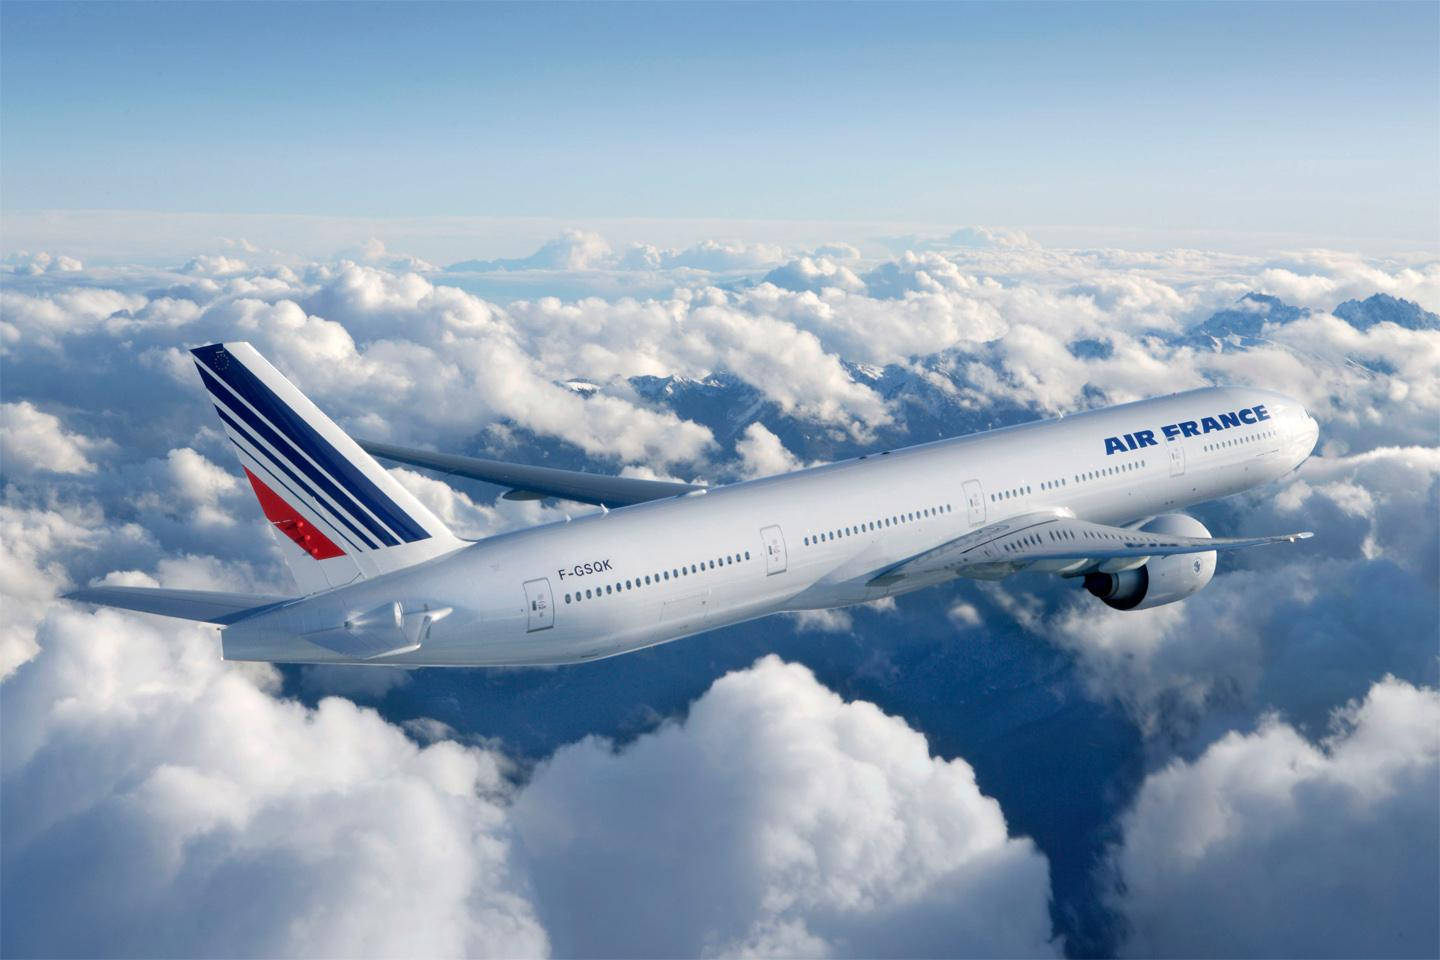 Air France Airline Boeing 777 Plane Over Clouds Wallpaper